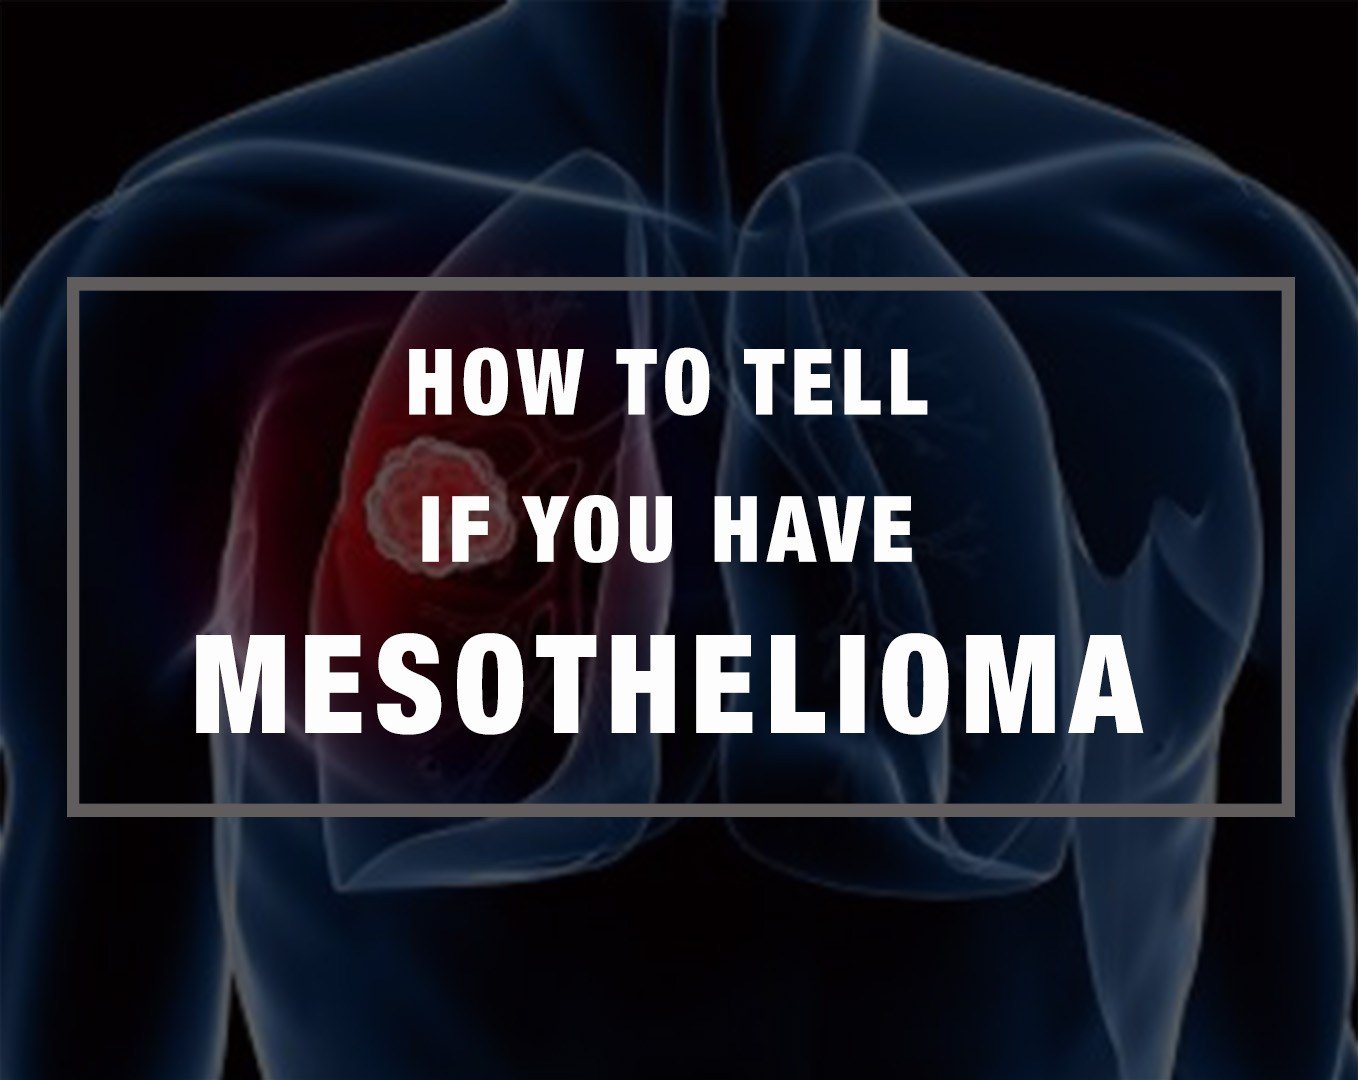 How to Tell if you Have Mesothelioma